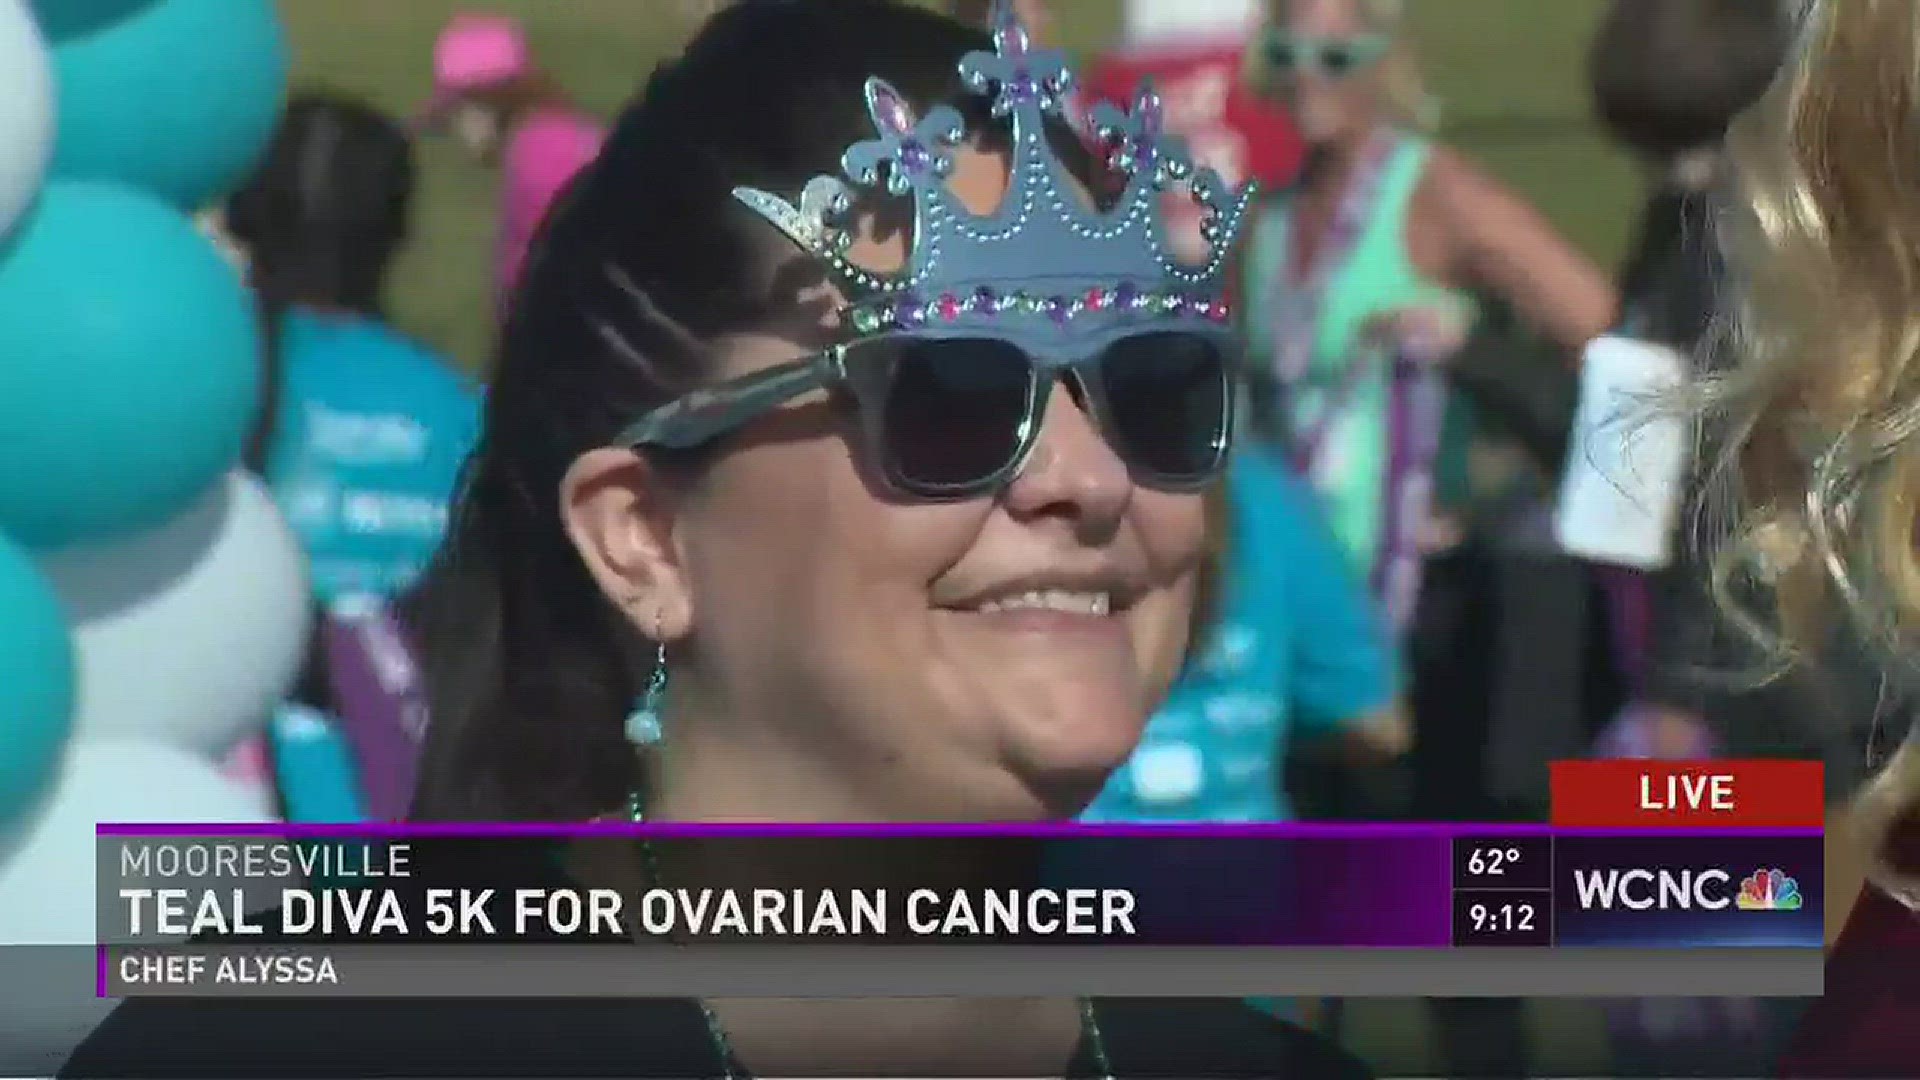 The Teal Divas 5K run and walk was held at Mooresville High School Saturday to raise awareness for ovarian cancer. Team WCNC was on hand to run for Nancy Troutman, the later mother of anchor Beth Troutman.